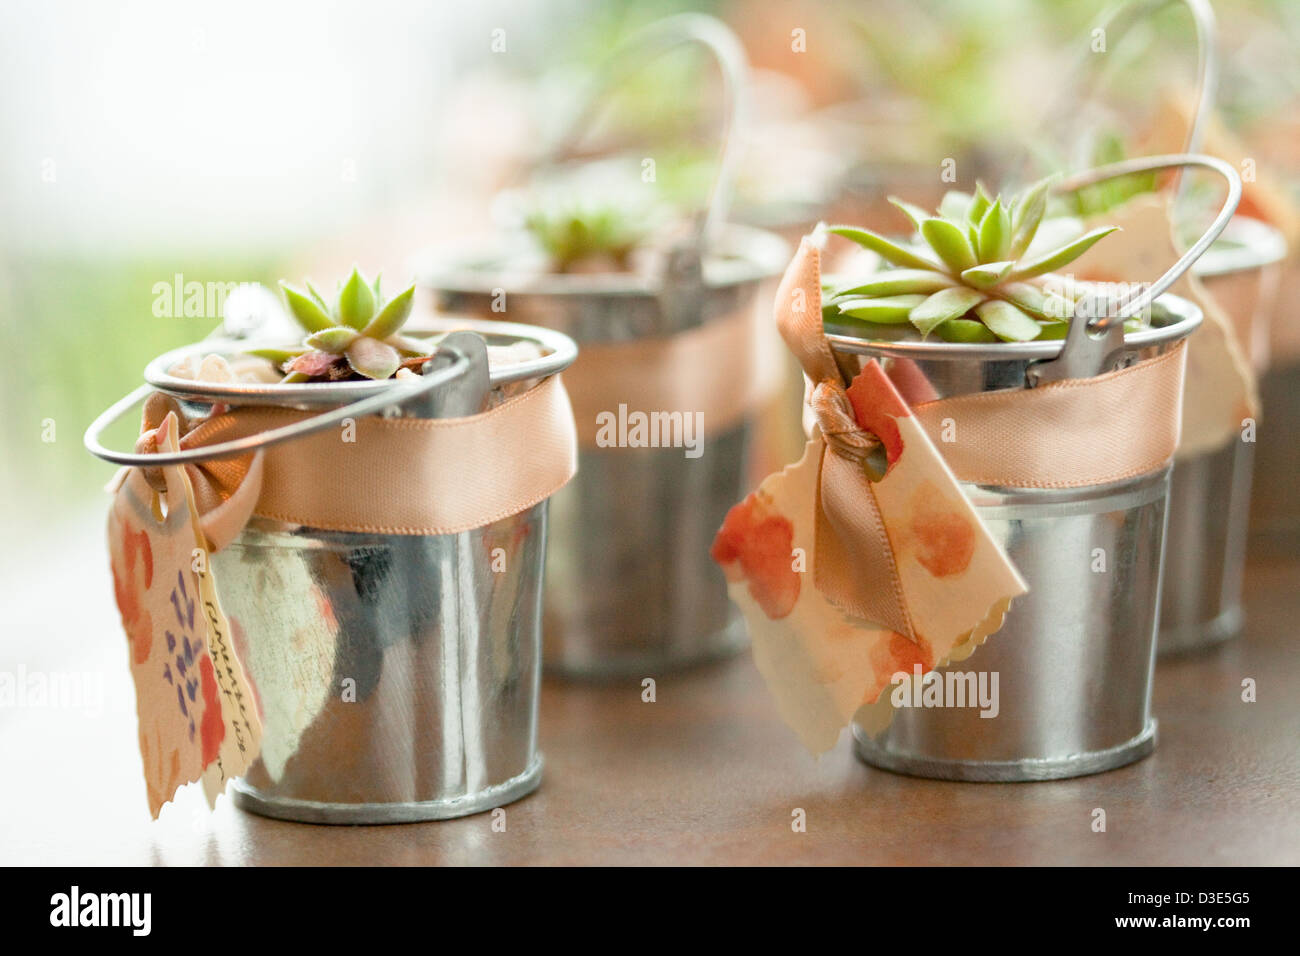 green gifts, succulent plants, wedding favors Stock Photo